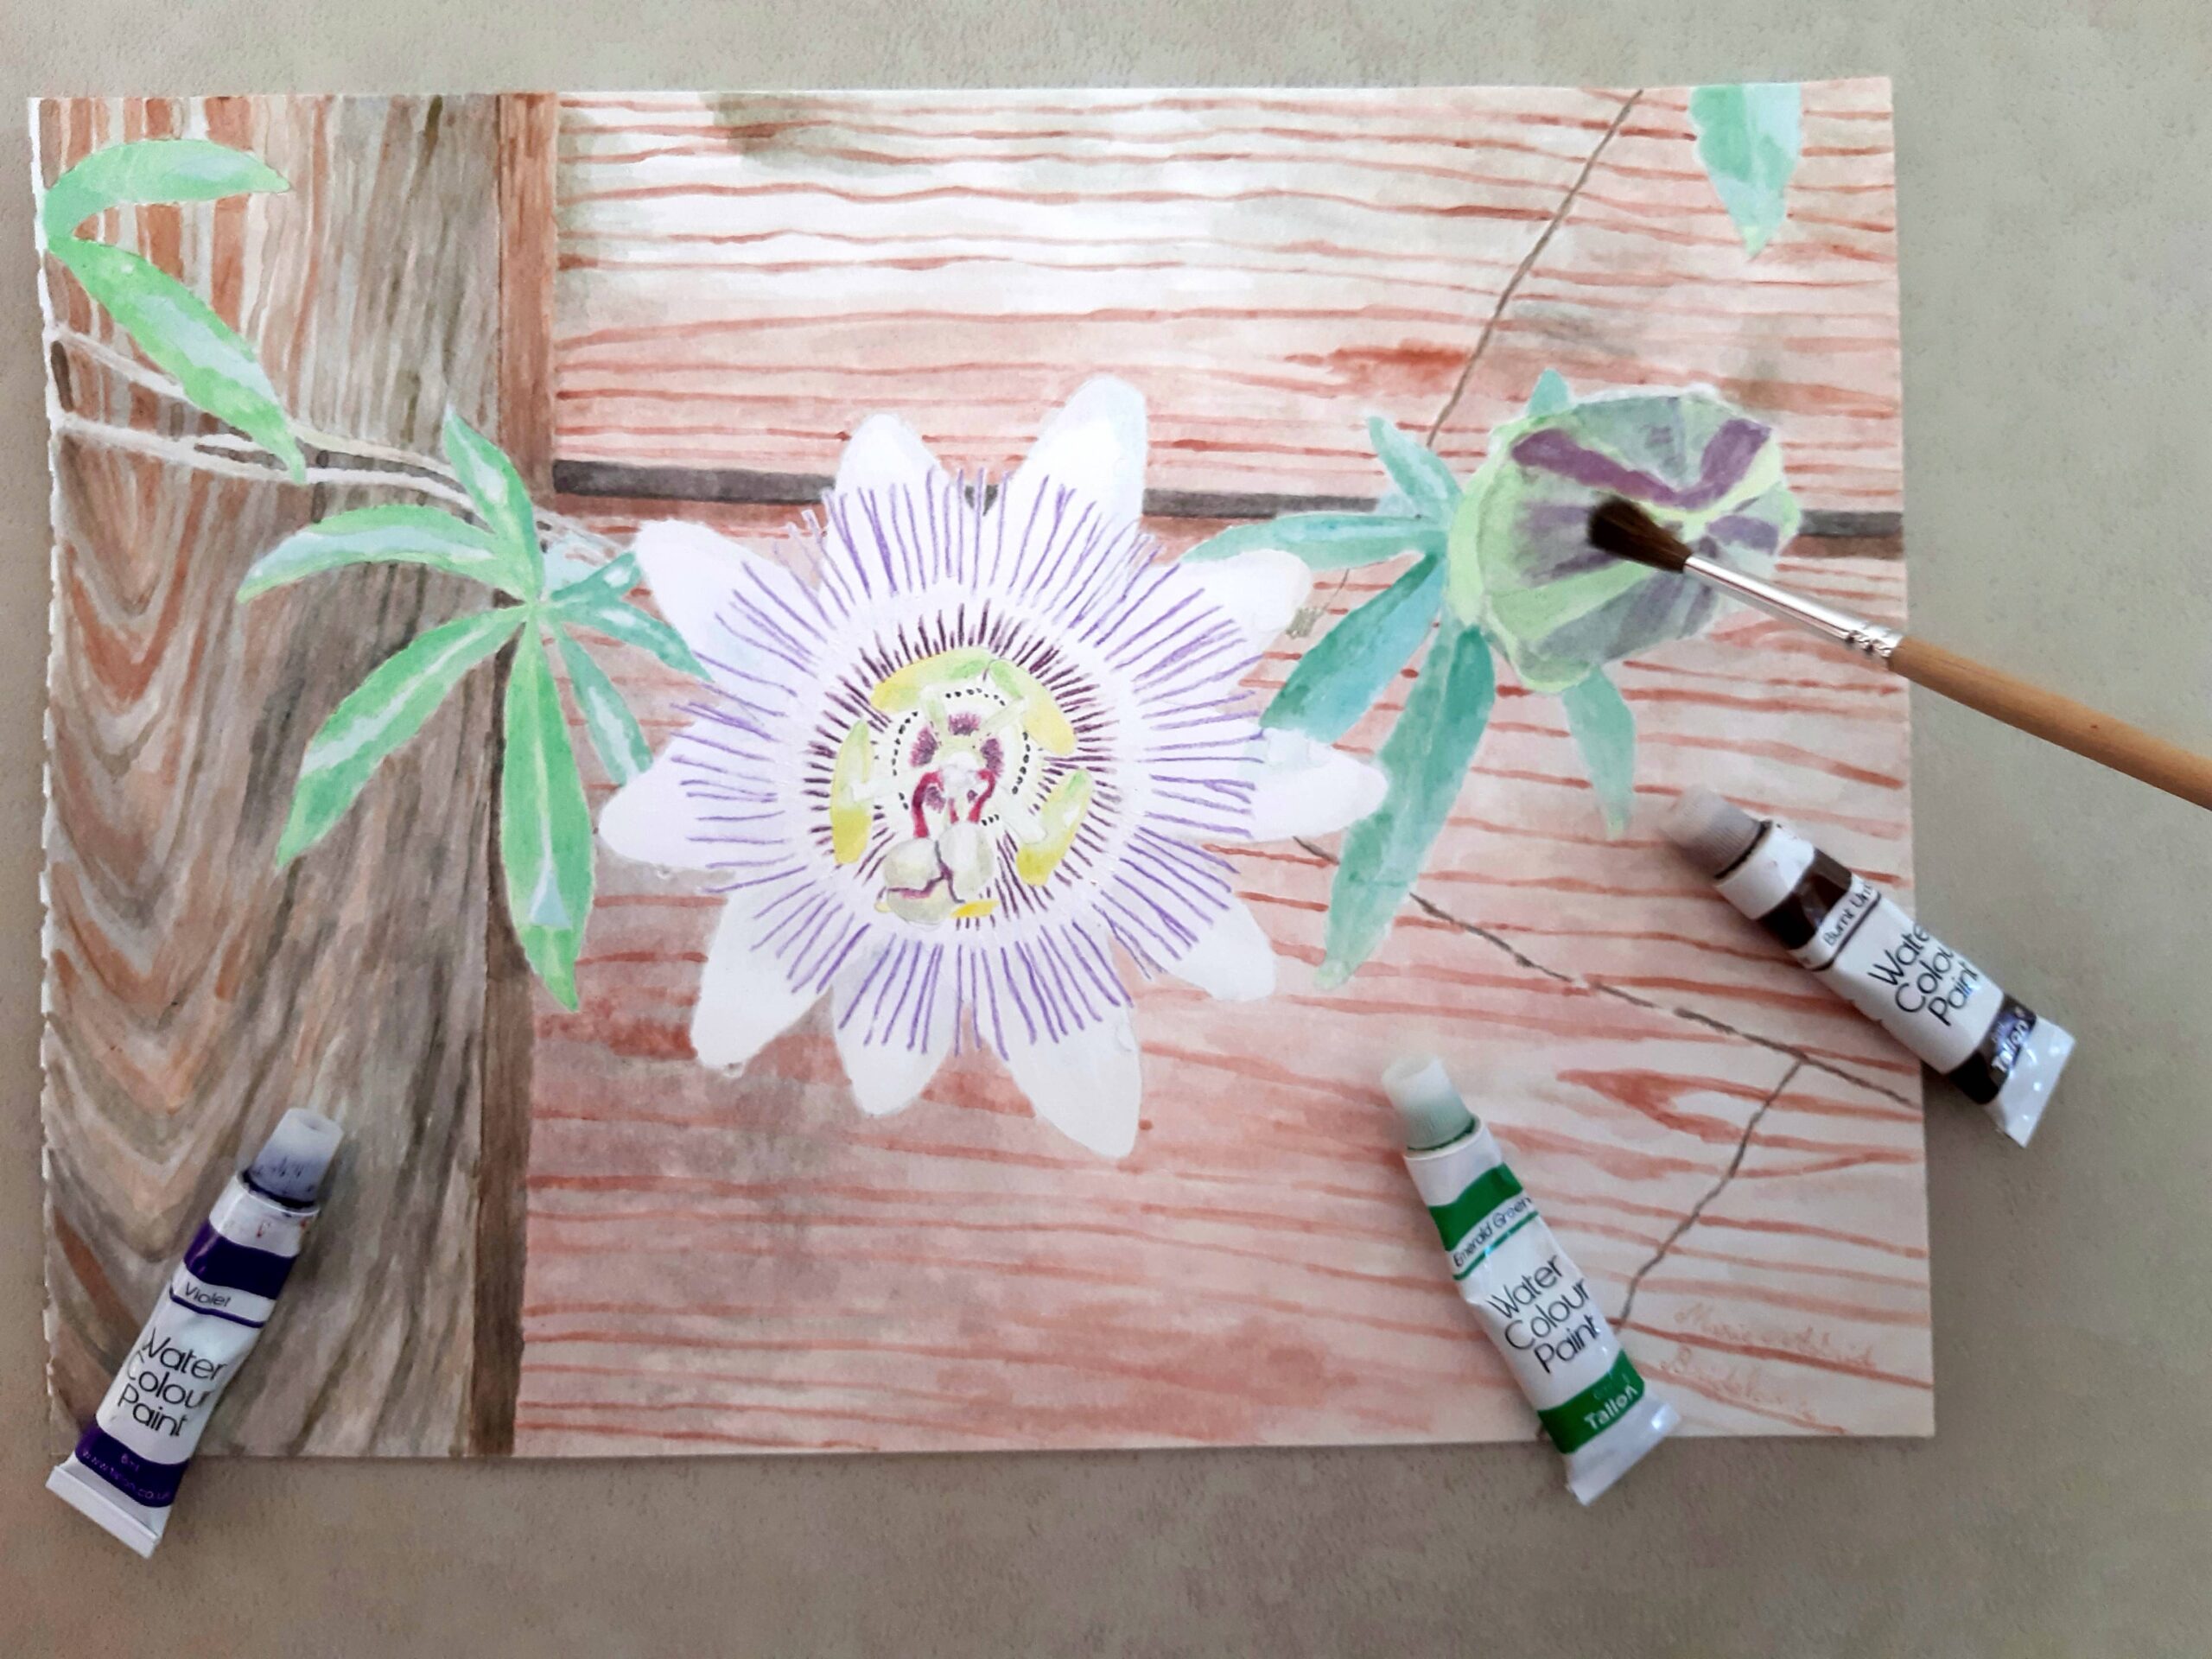 My first steps in watercolour: passion flower on a wooden fence